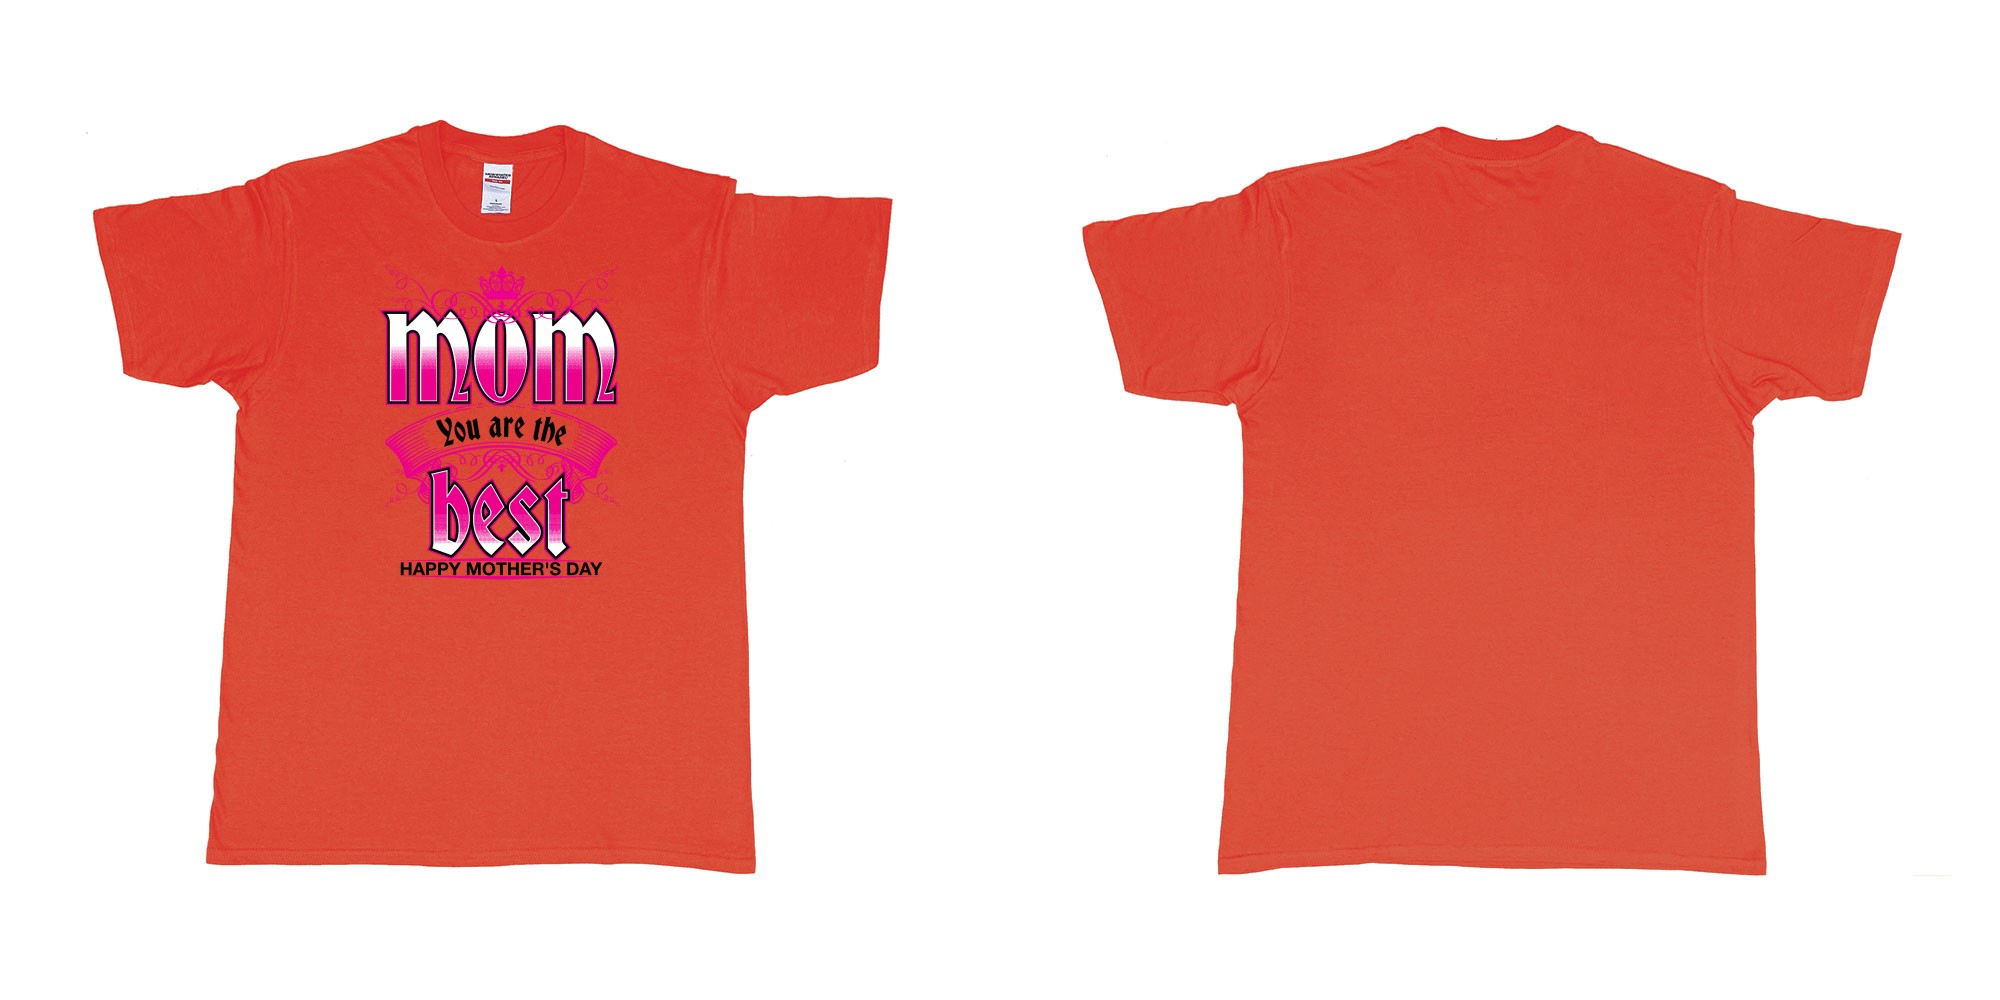 Custom tshirt design crown mom you are the best happy morthers day in fabric color red choice your own text made in Bali by The Pirate Way